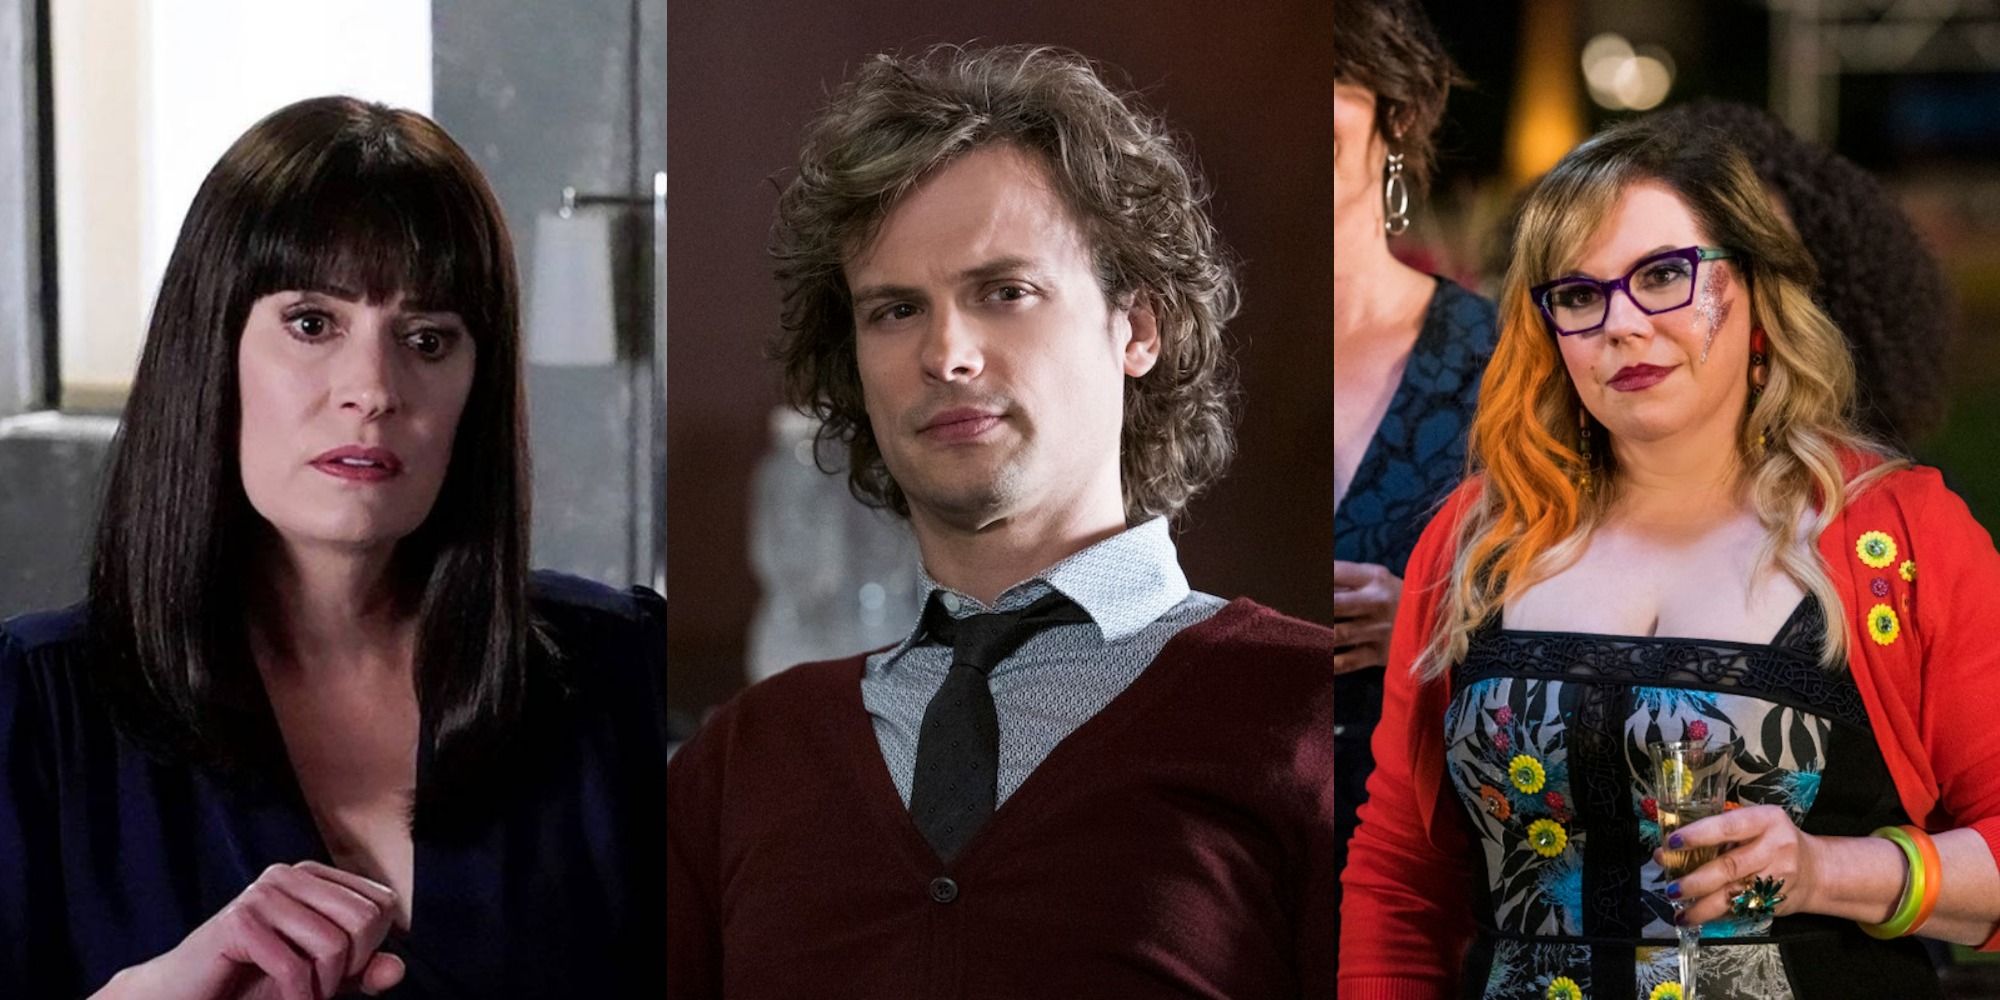 15 Criminal Minds Episodes to Watch Before the Final Season (PHOTOS)